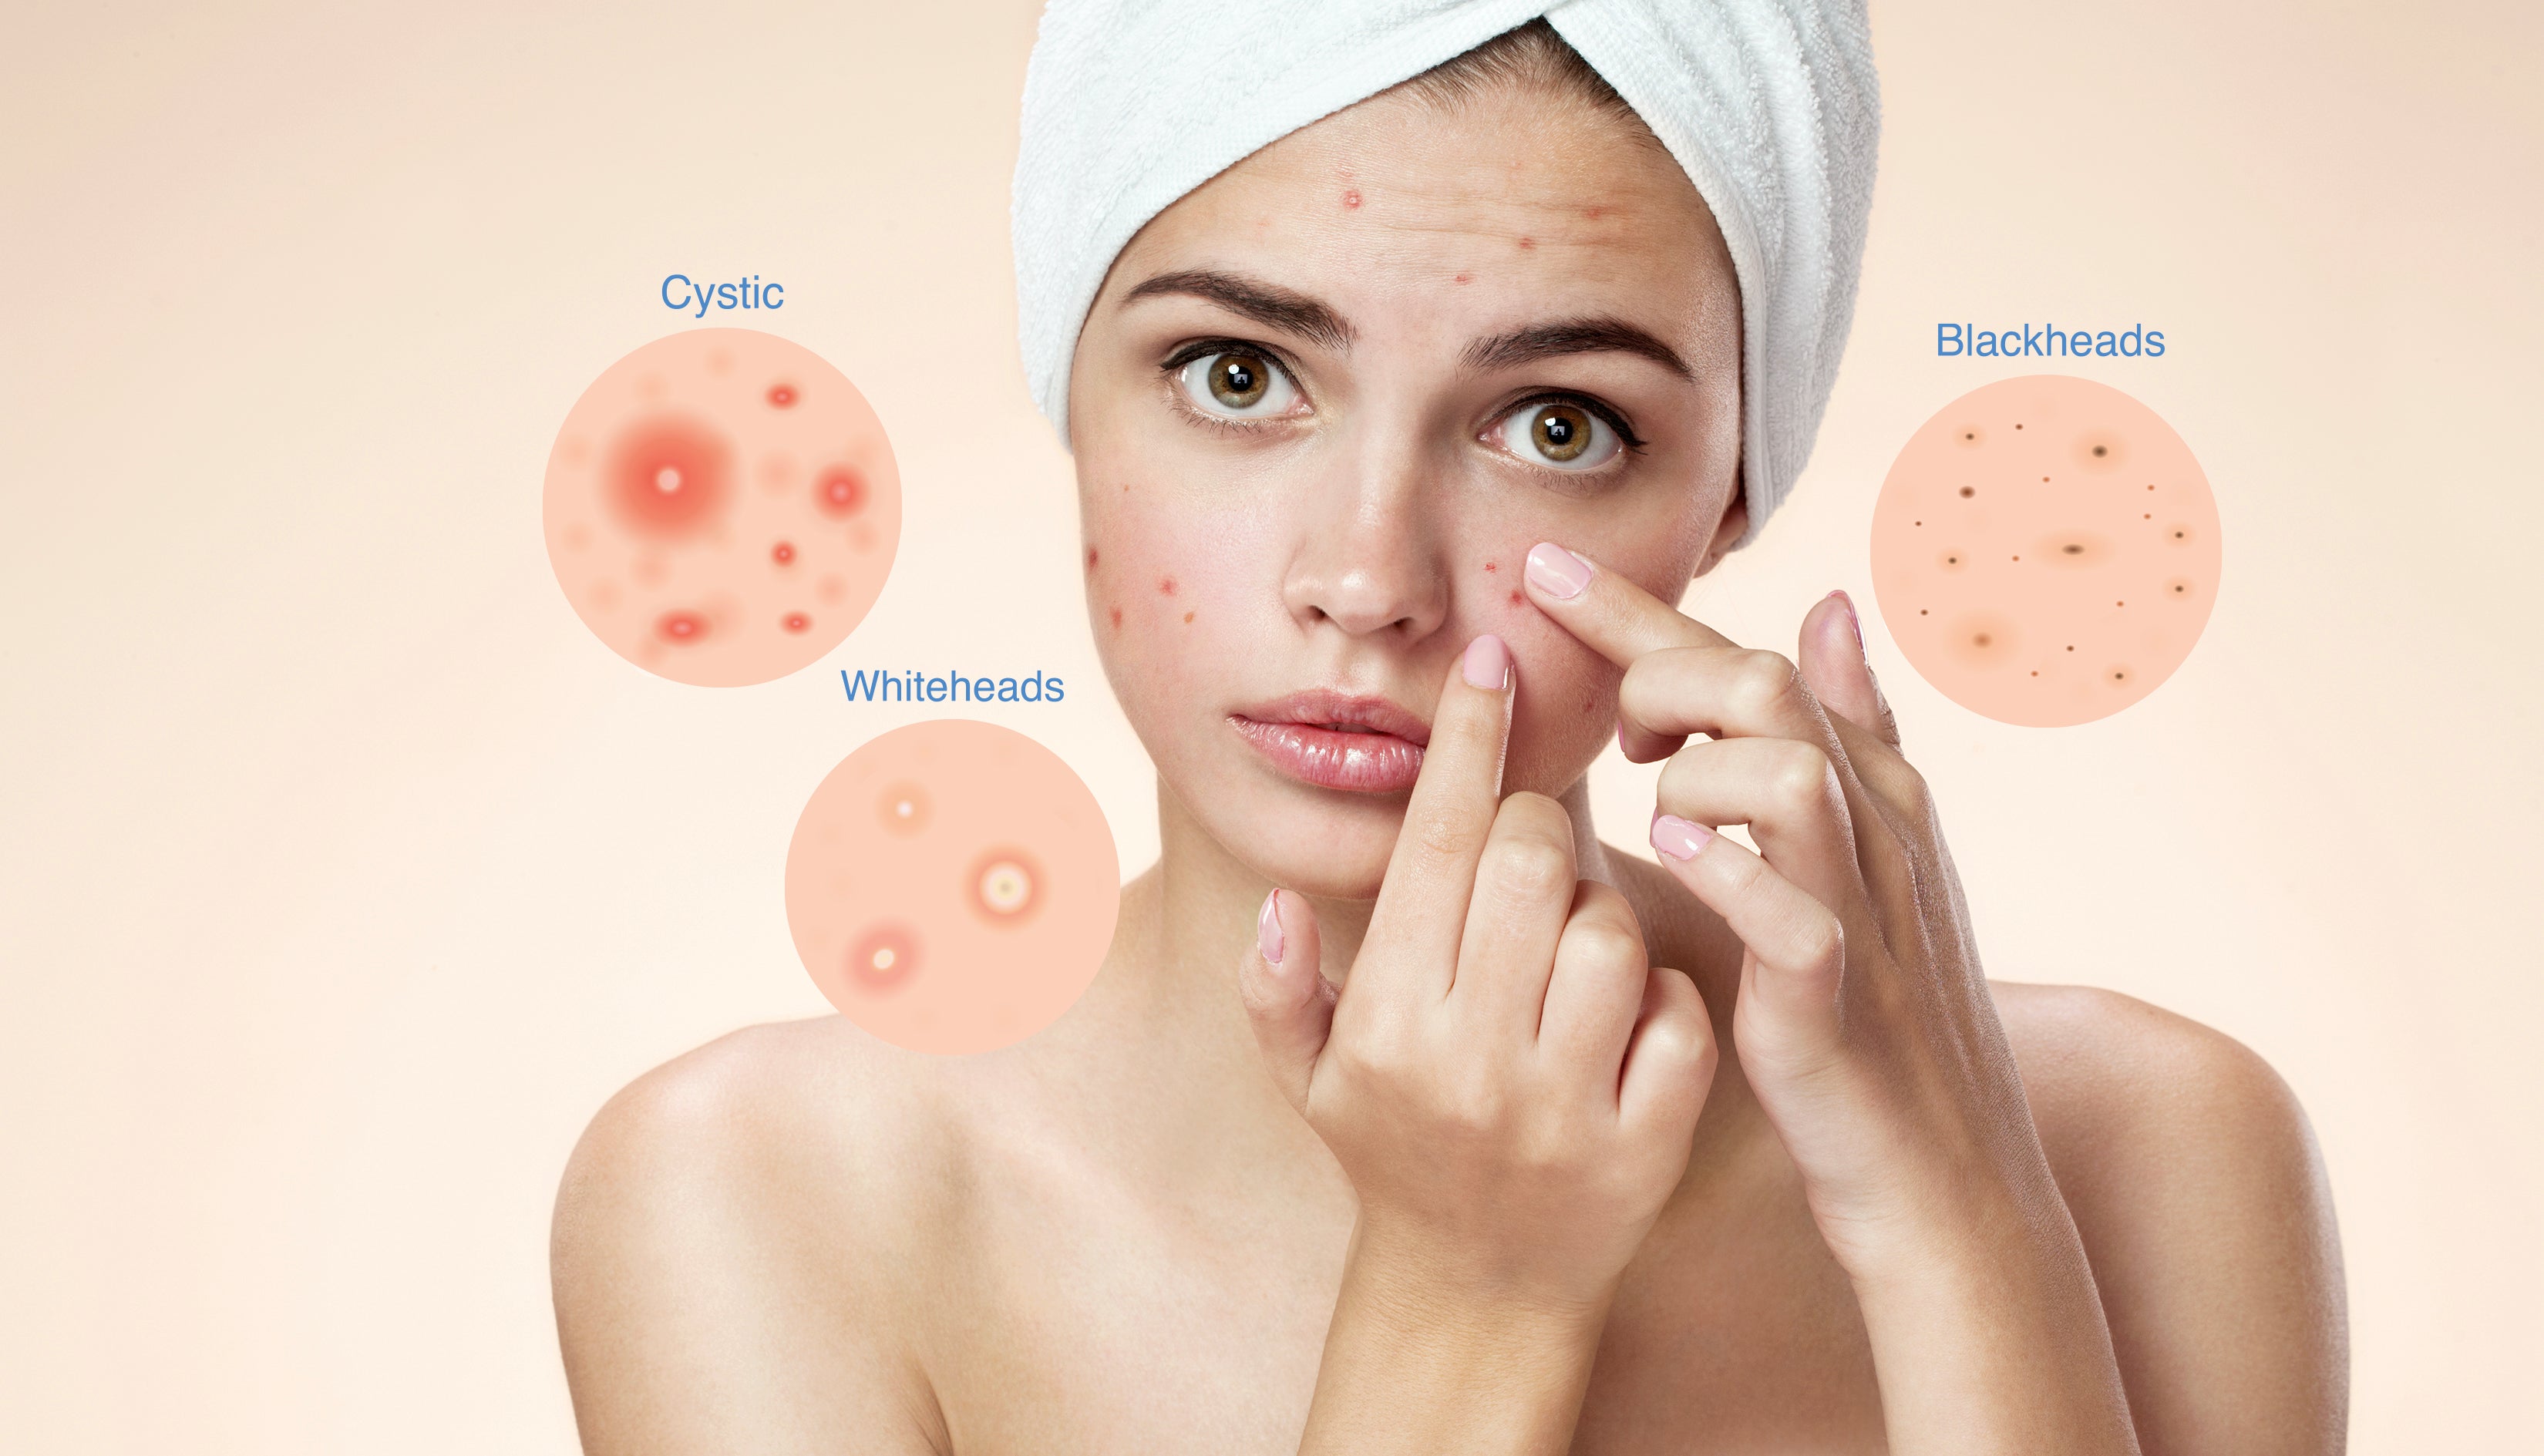 Whitehead vs Cystic vs Blackhead Acne:  How to effectively use Acne patches